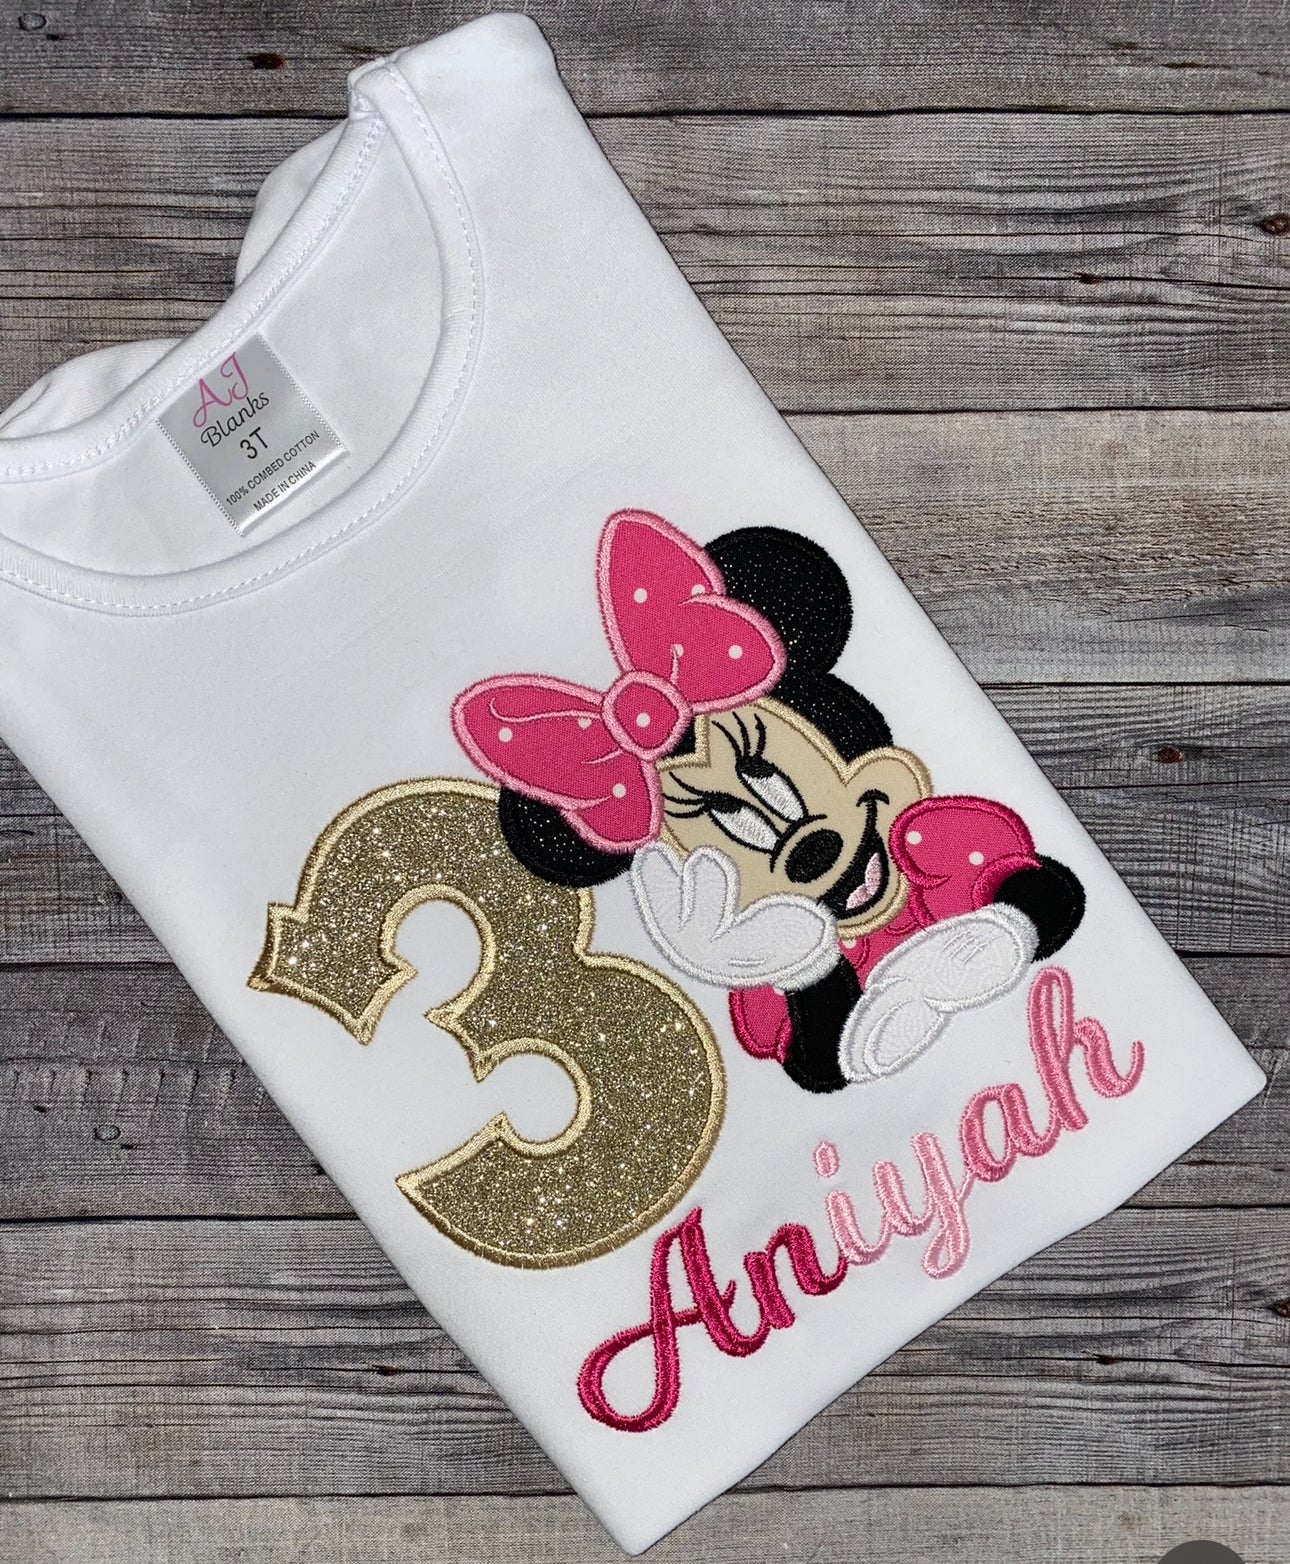 Minnie Mouse birthday outfit